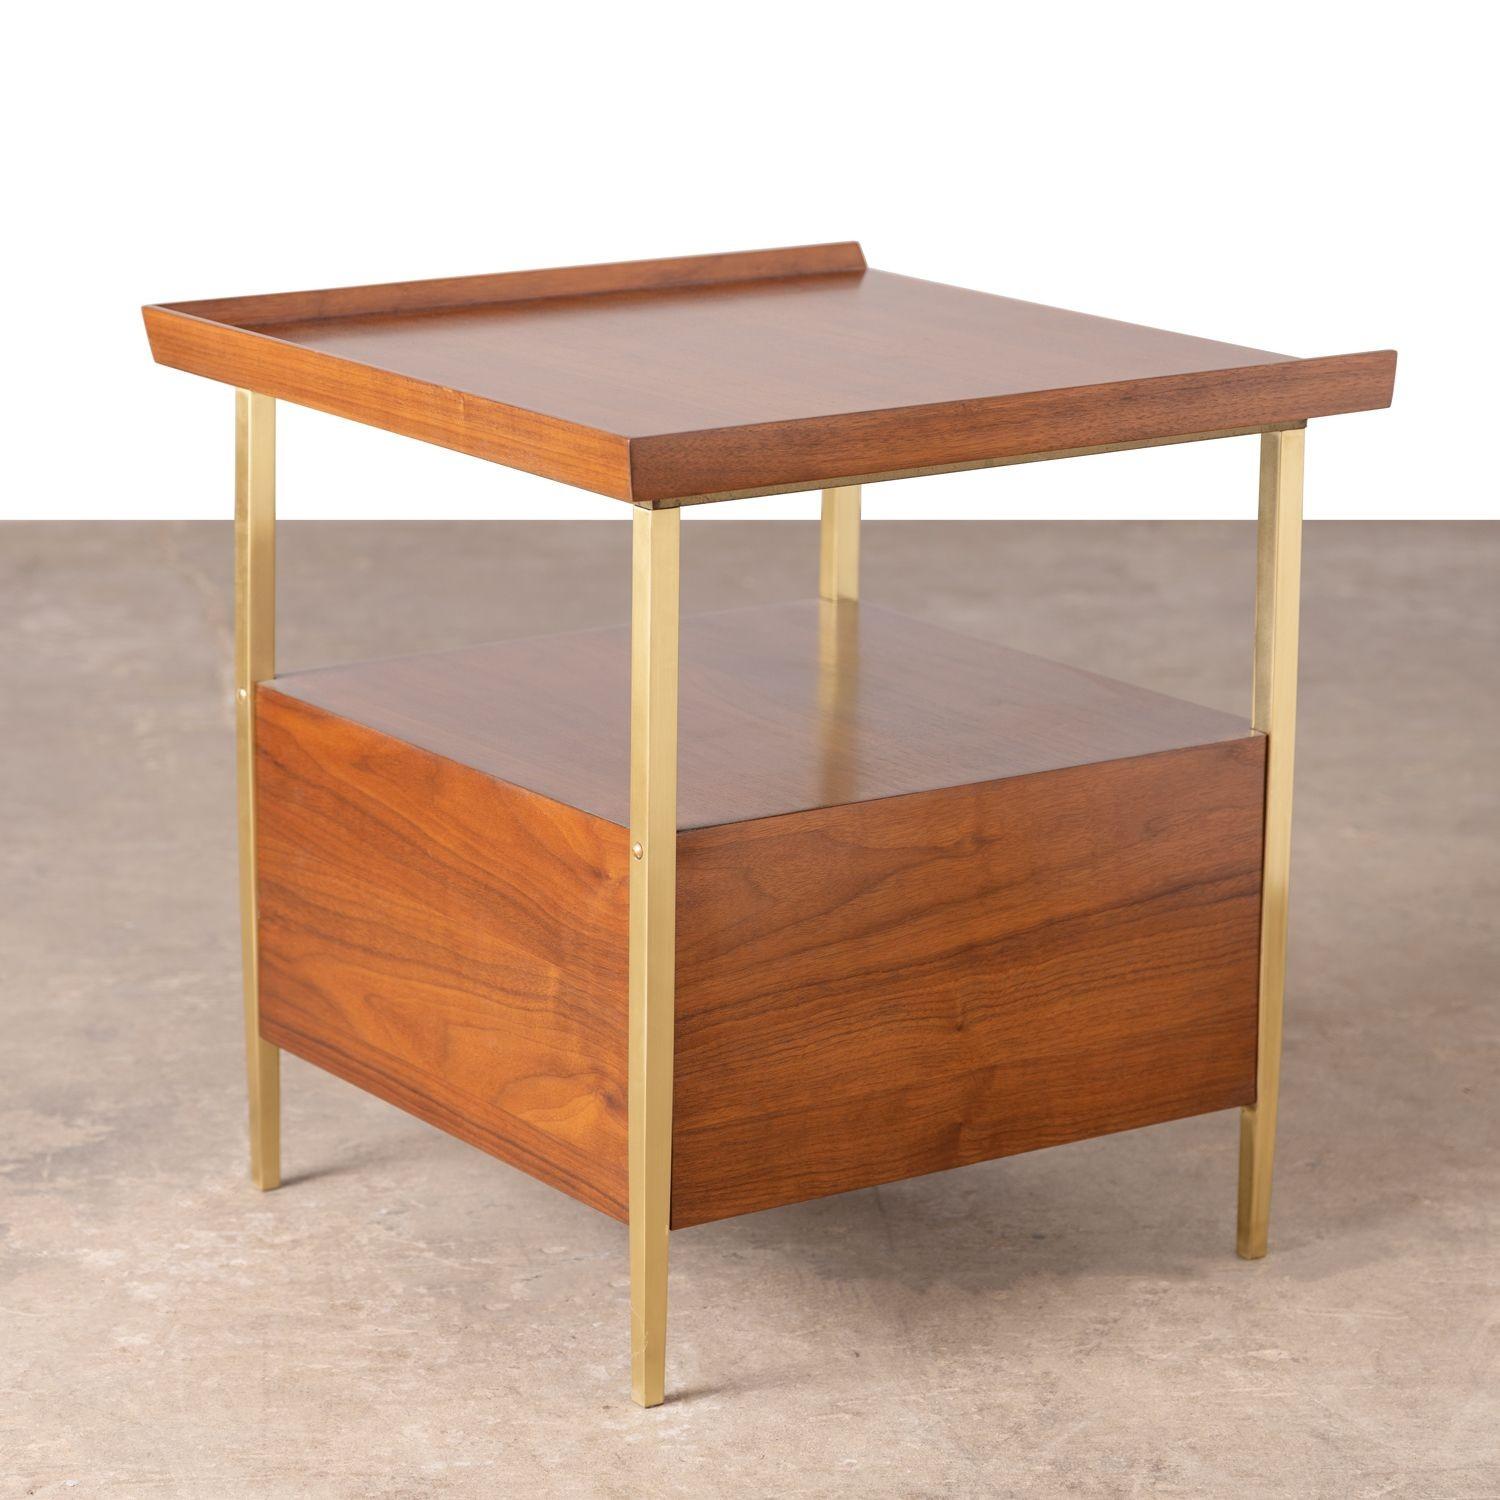 Nightstands / Side Tables by Milo Baughman for Arch Gordon In Excellent Condition For Sale In Dallas, TX